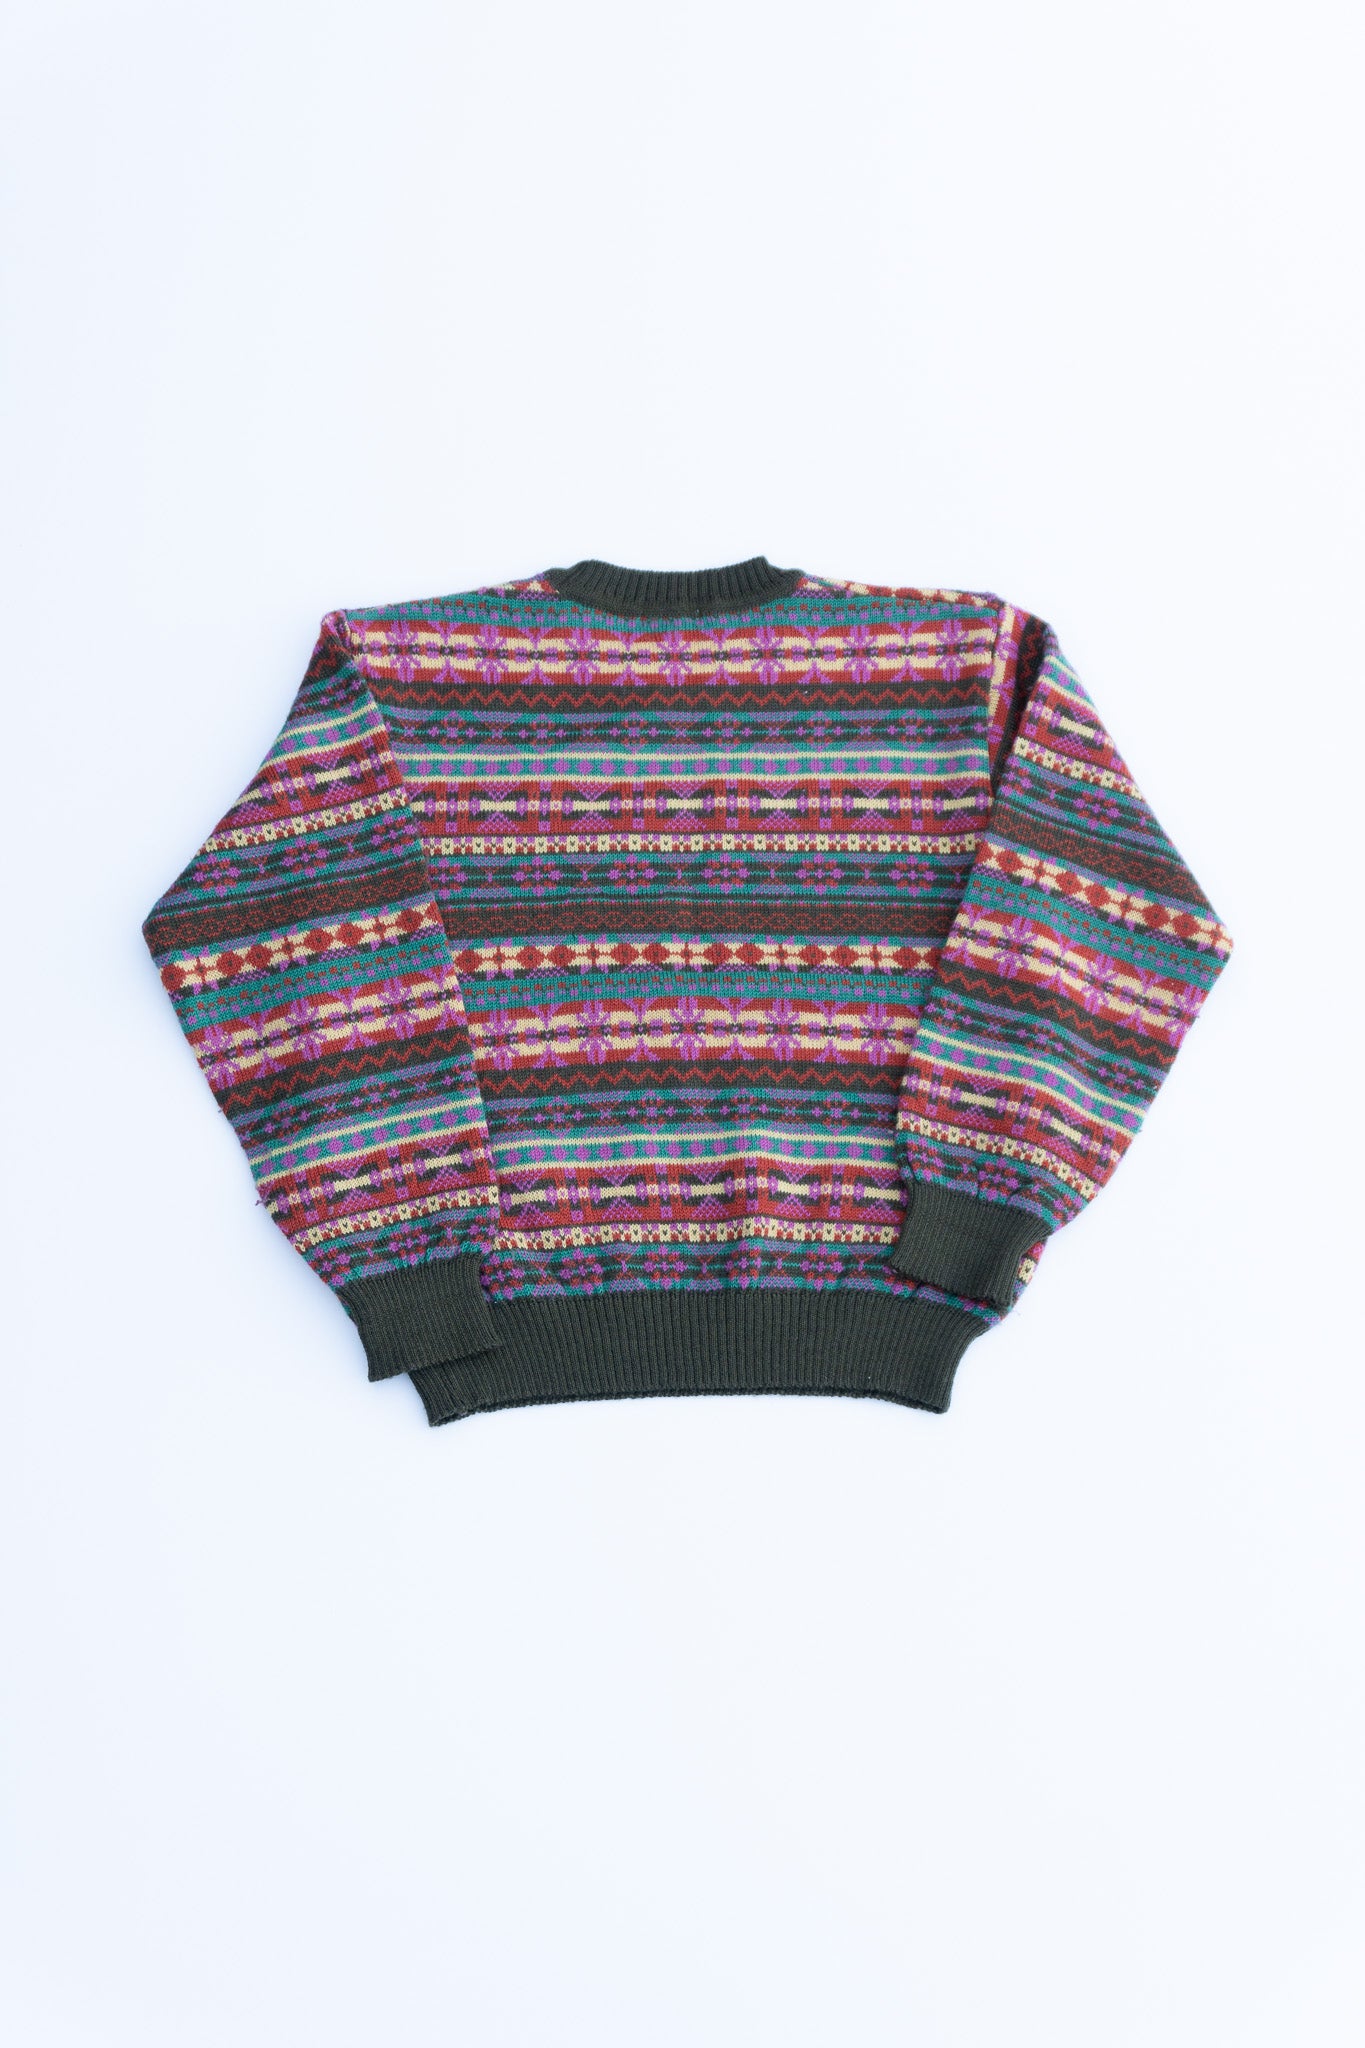 "Sweet cabin" Colorful Patterned Sweater